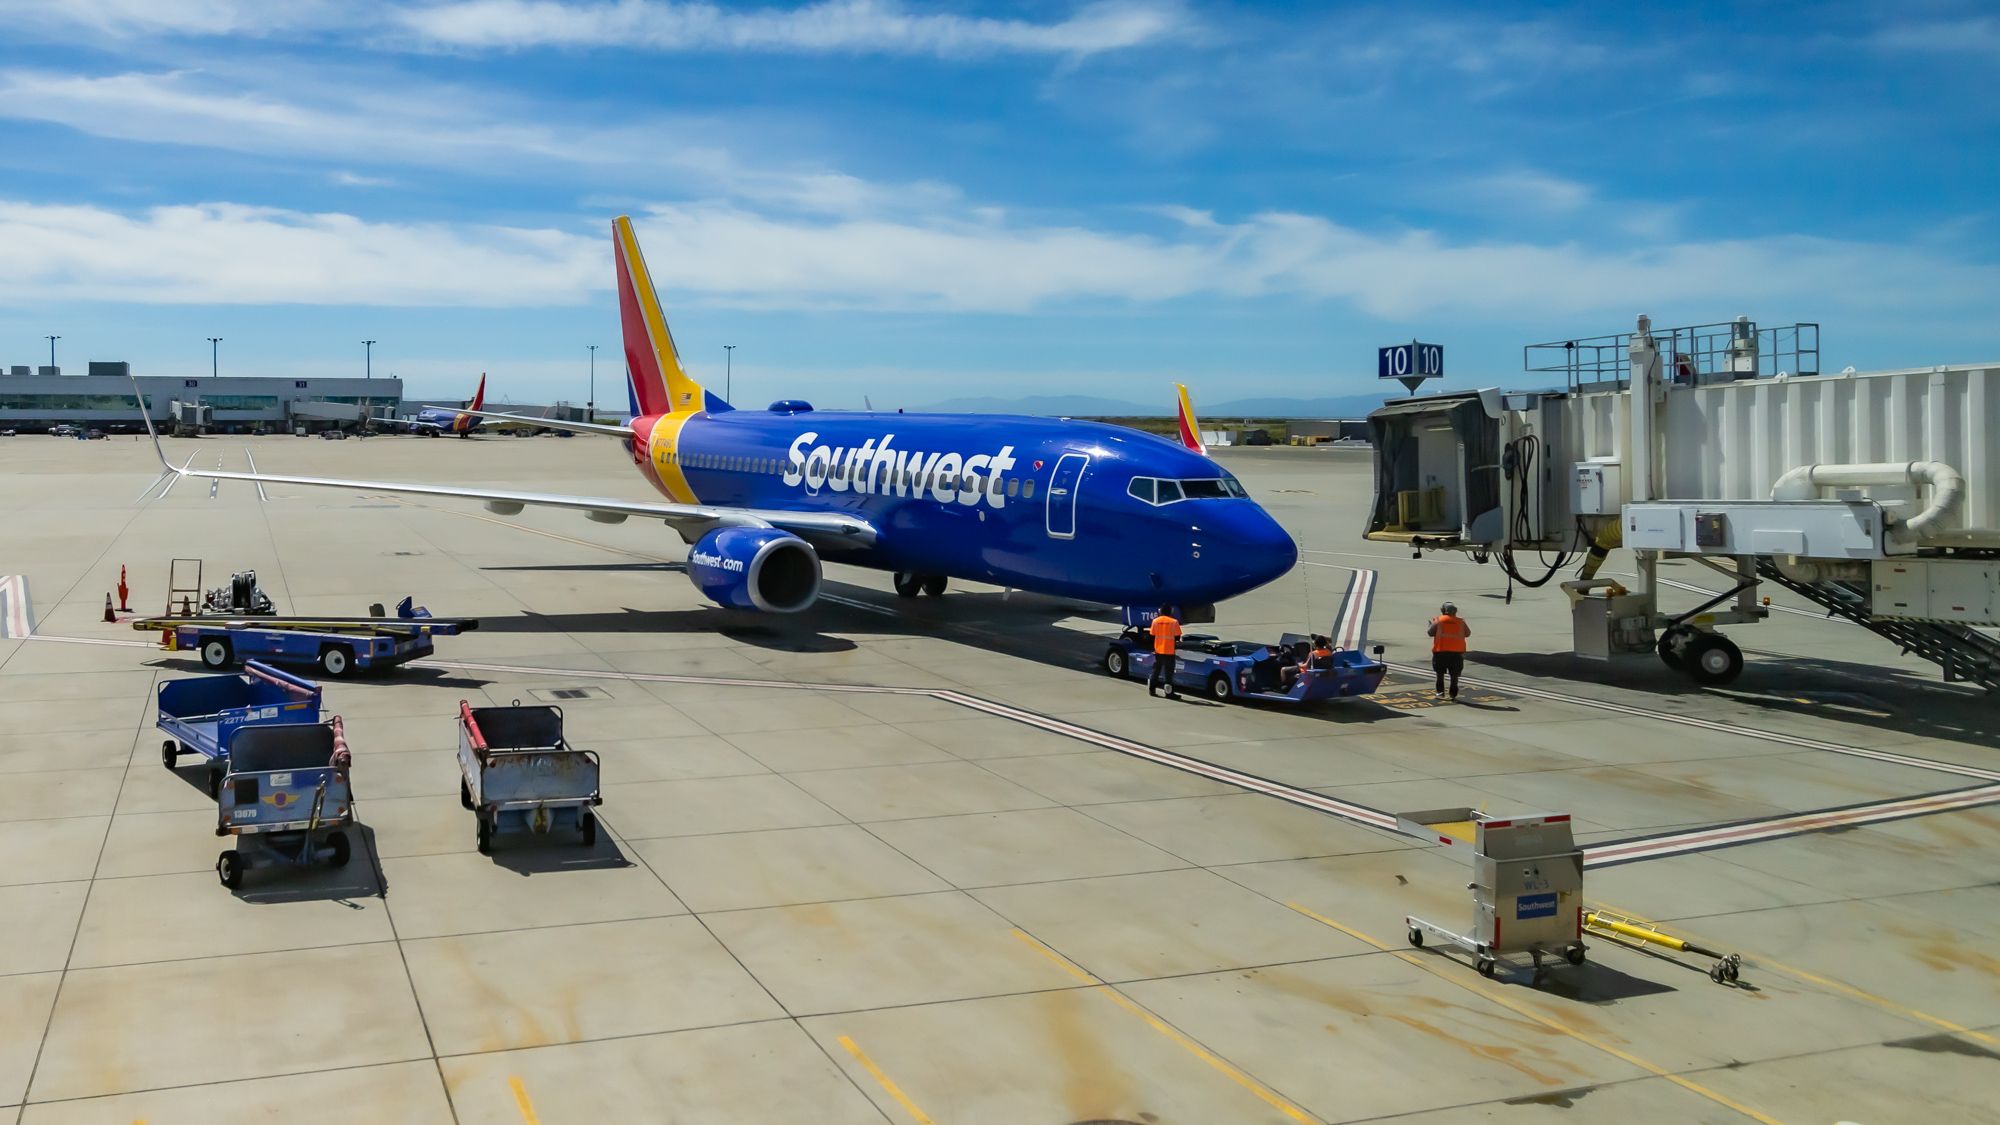 A Southwest Airlines Boeing 737 being pushed back.